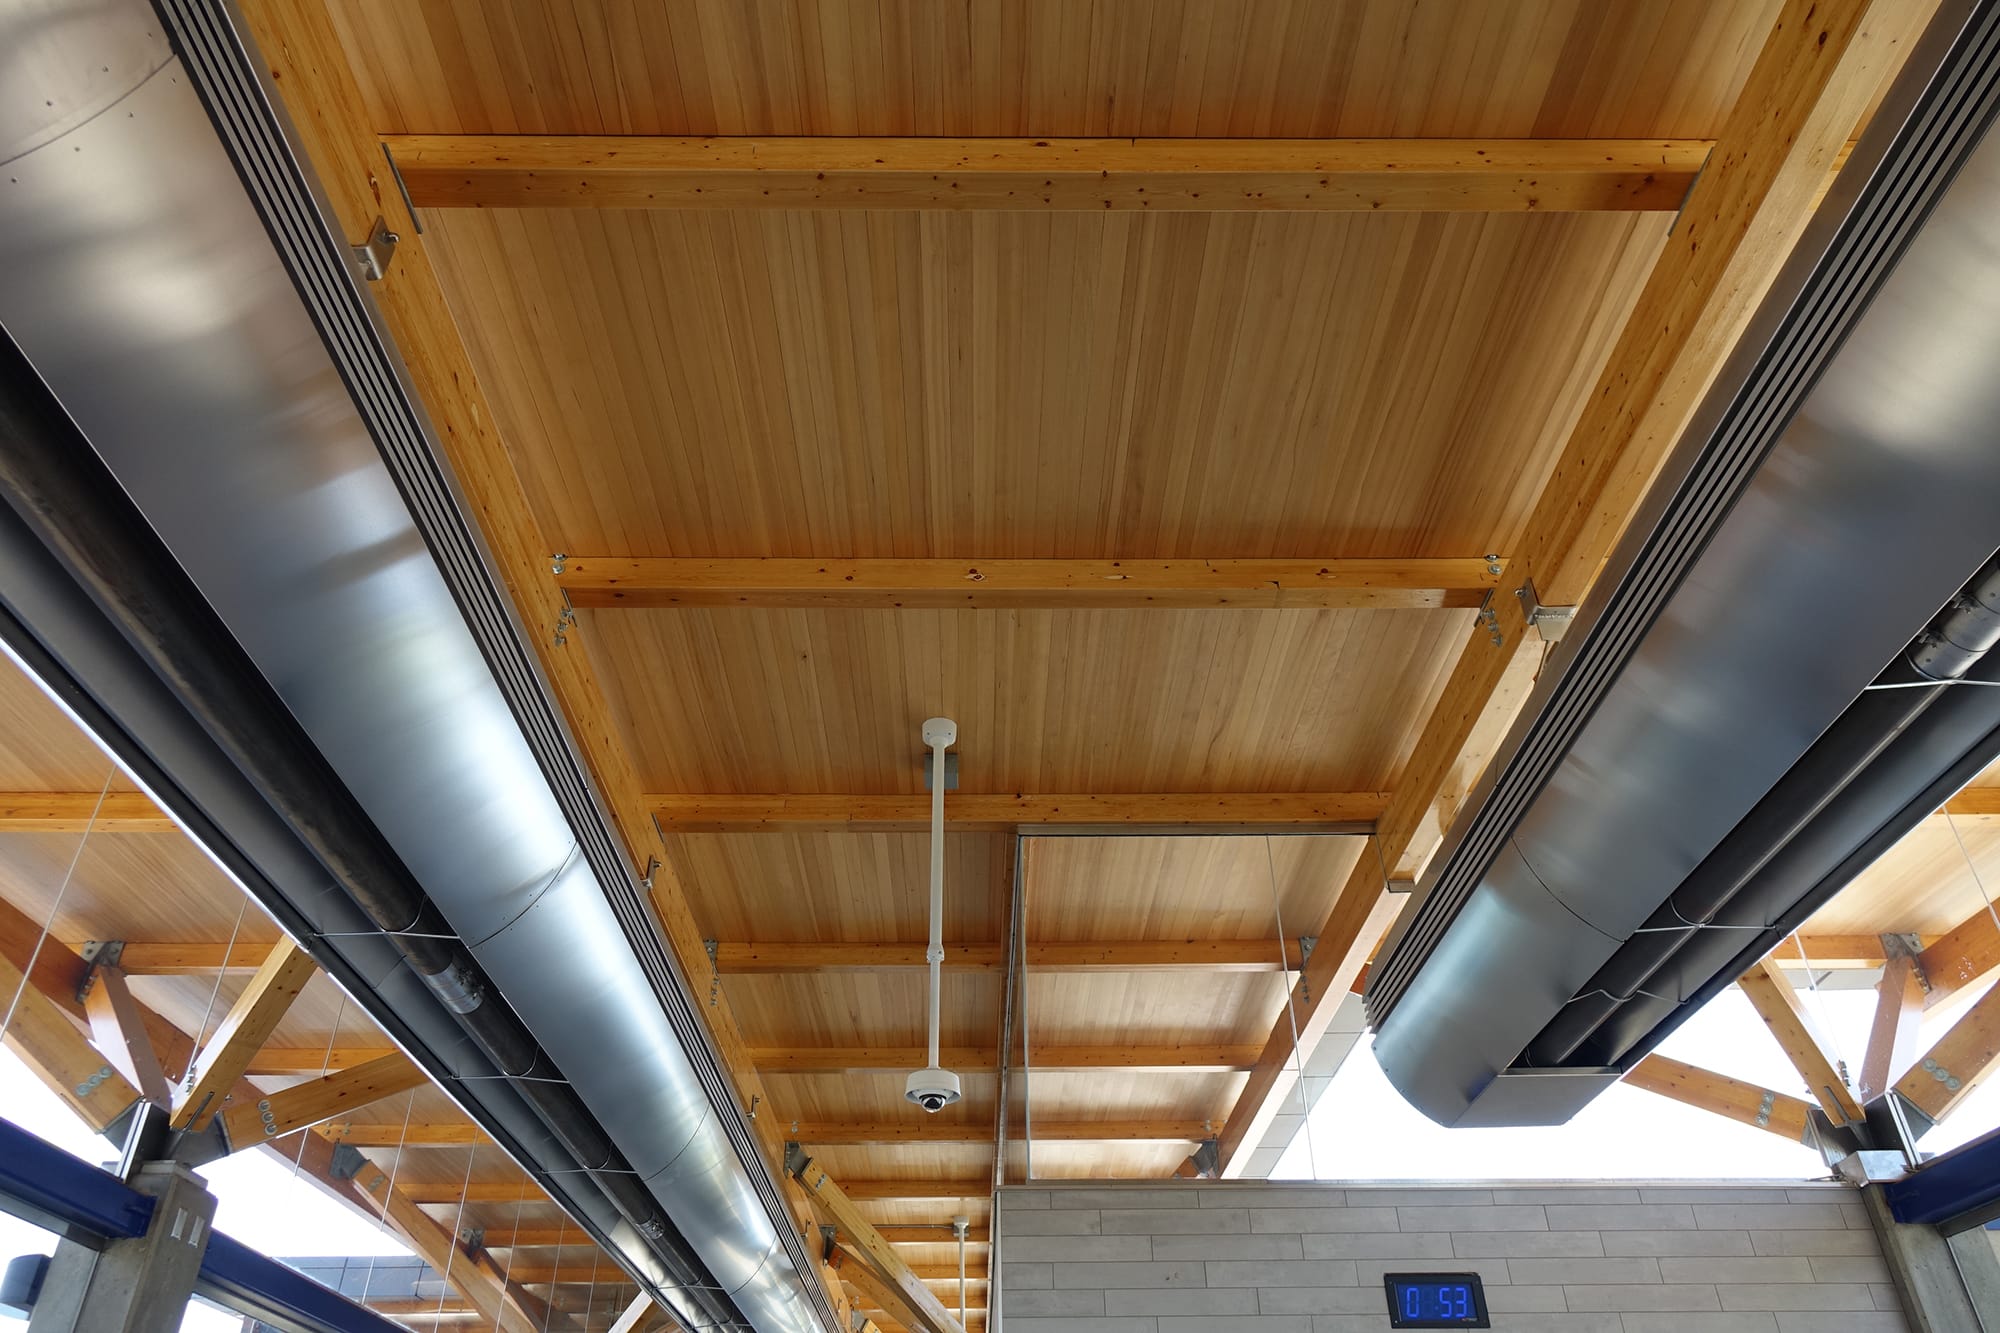 Lewis Farms Transit Centre ceiling and heating